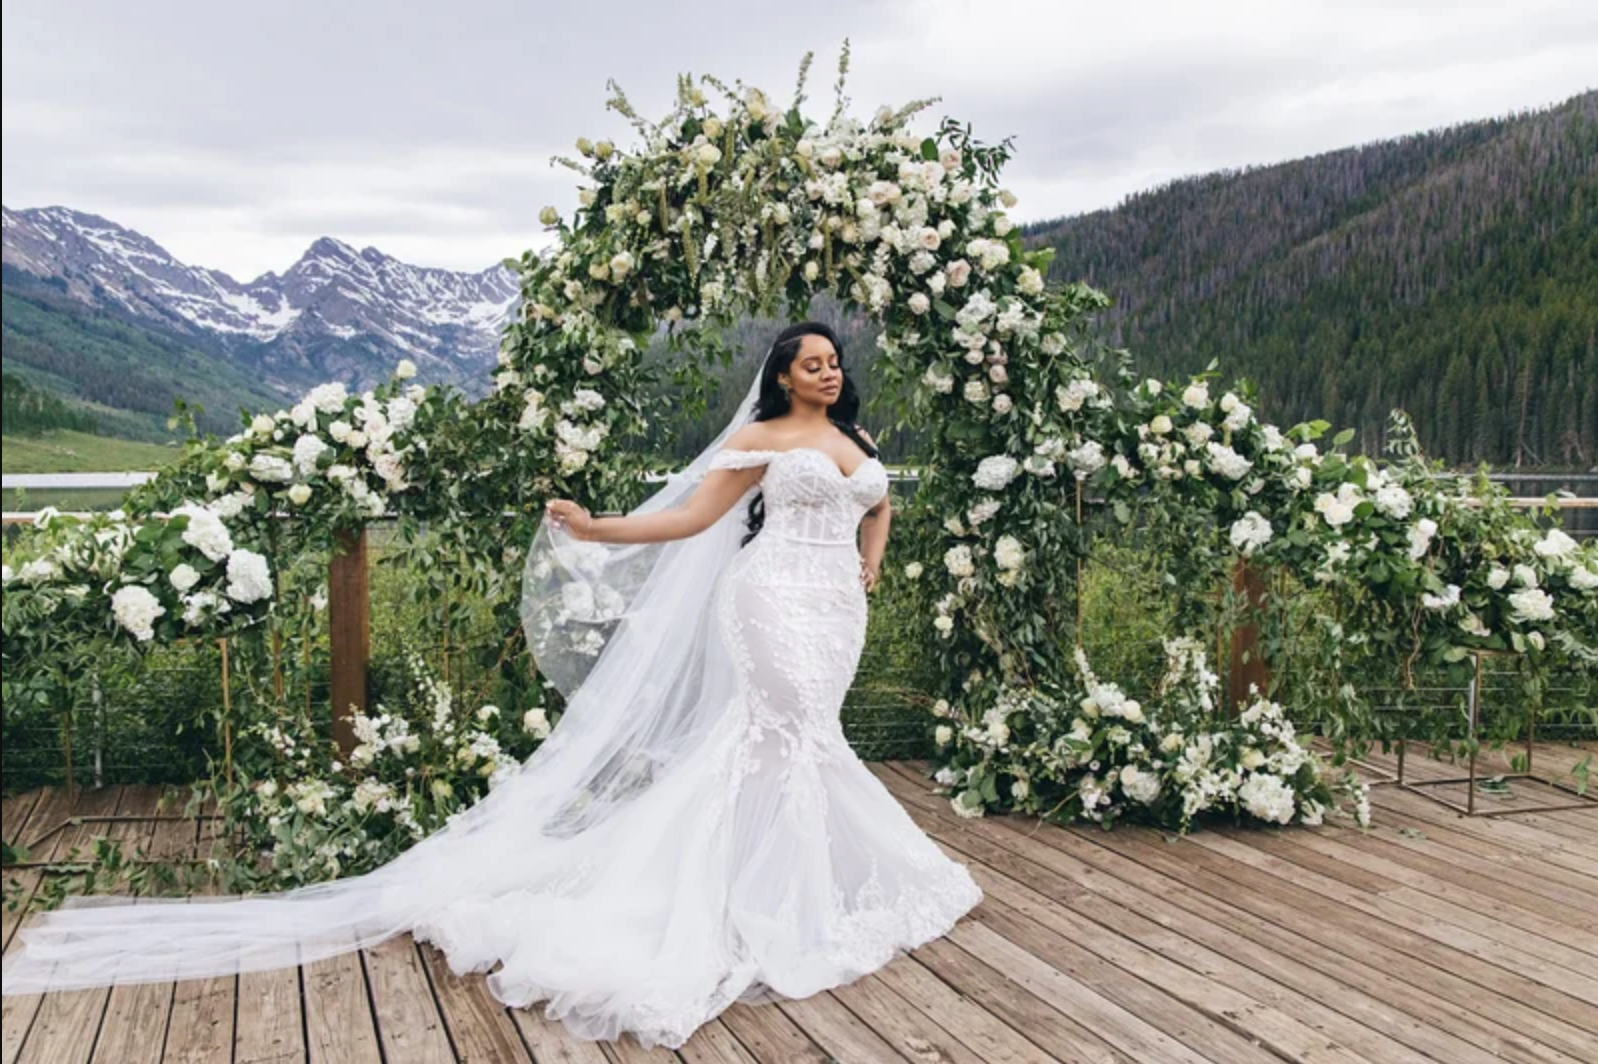 Bridal Bliss: 10 Sweet Photos Of Joyful Brides That Will Make Your Day